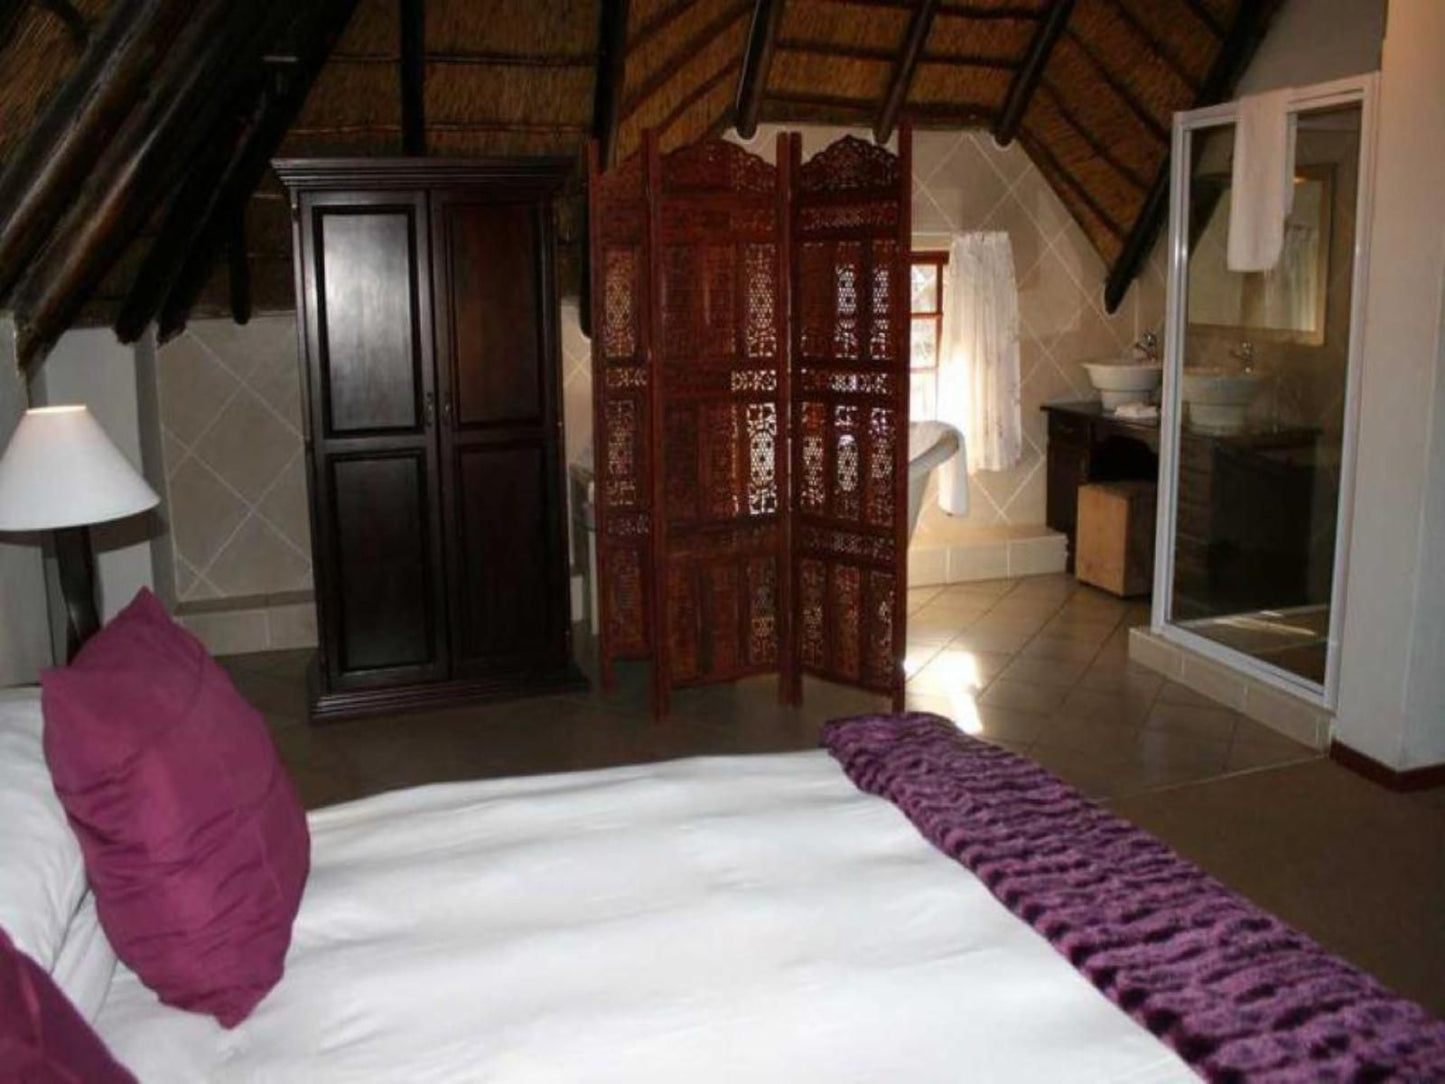 Monchique Guest House And Conference Centre Muldersdrift Gauteng South Africa Bedroom